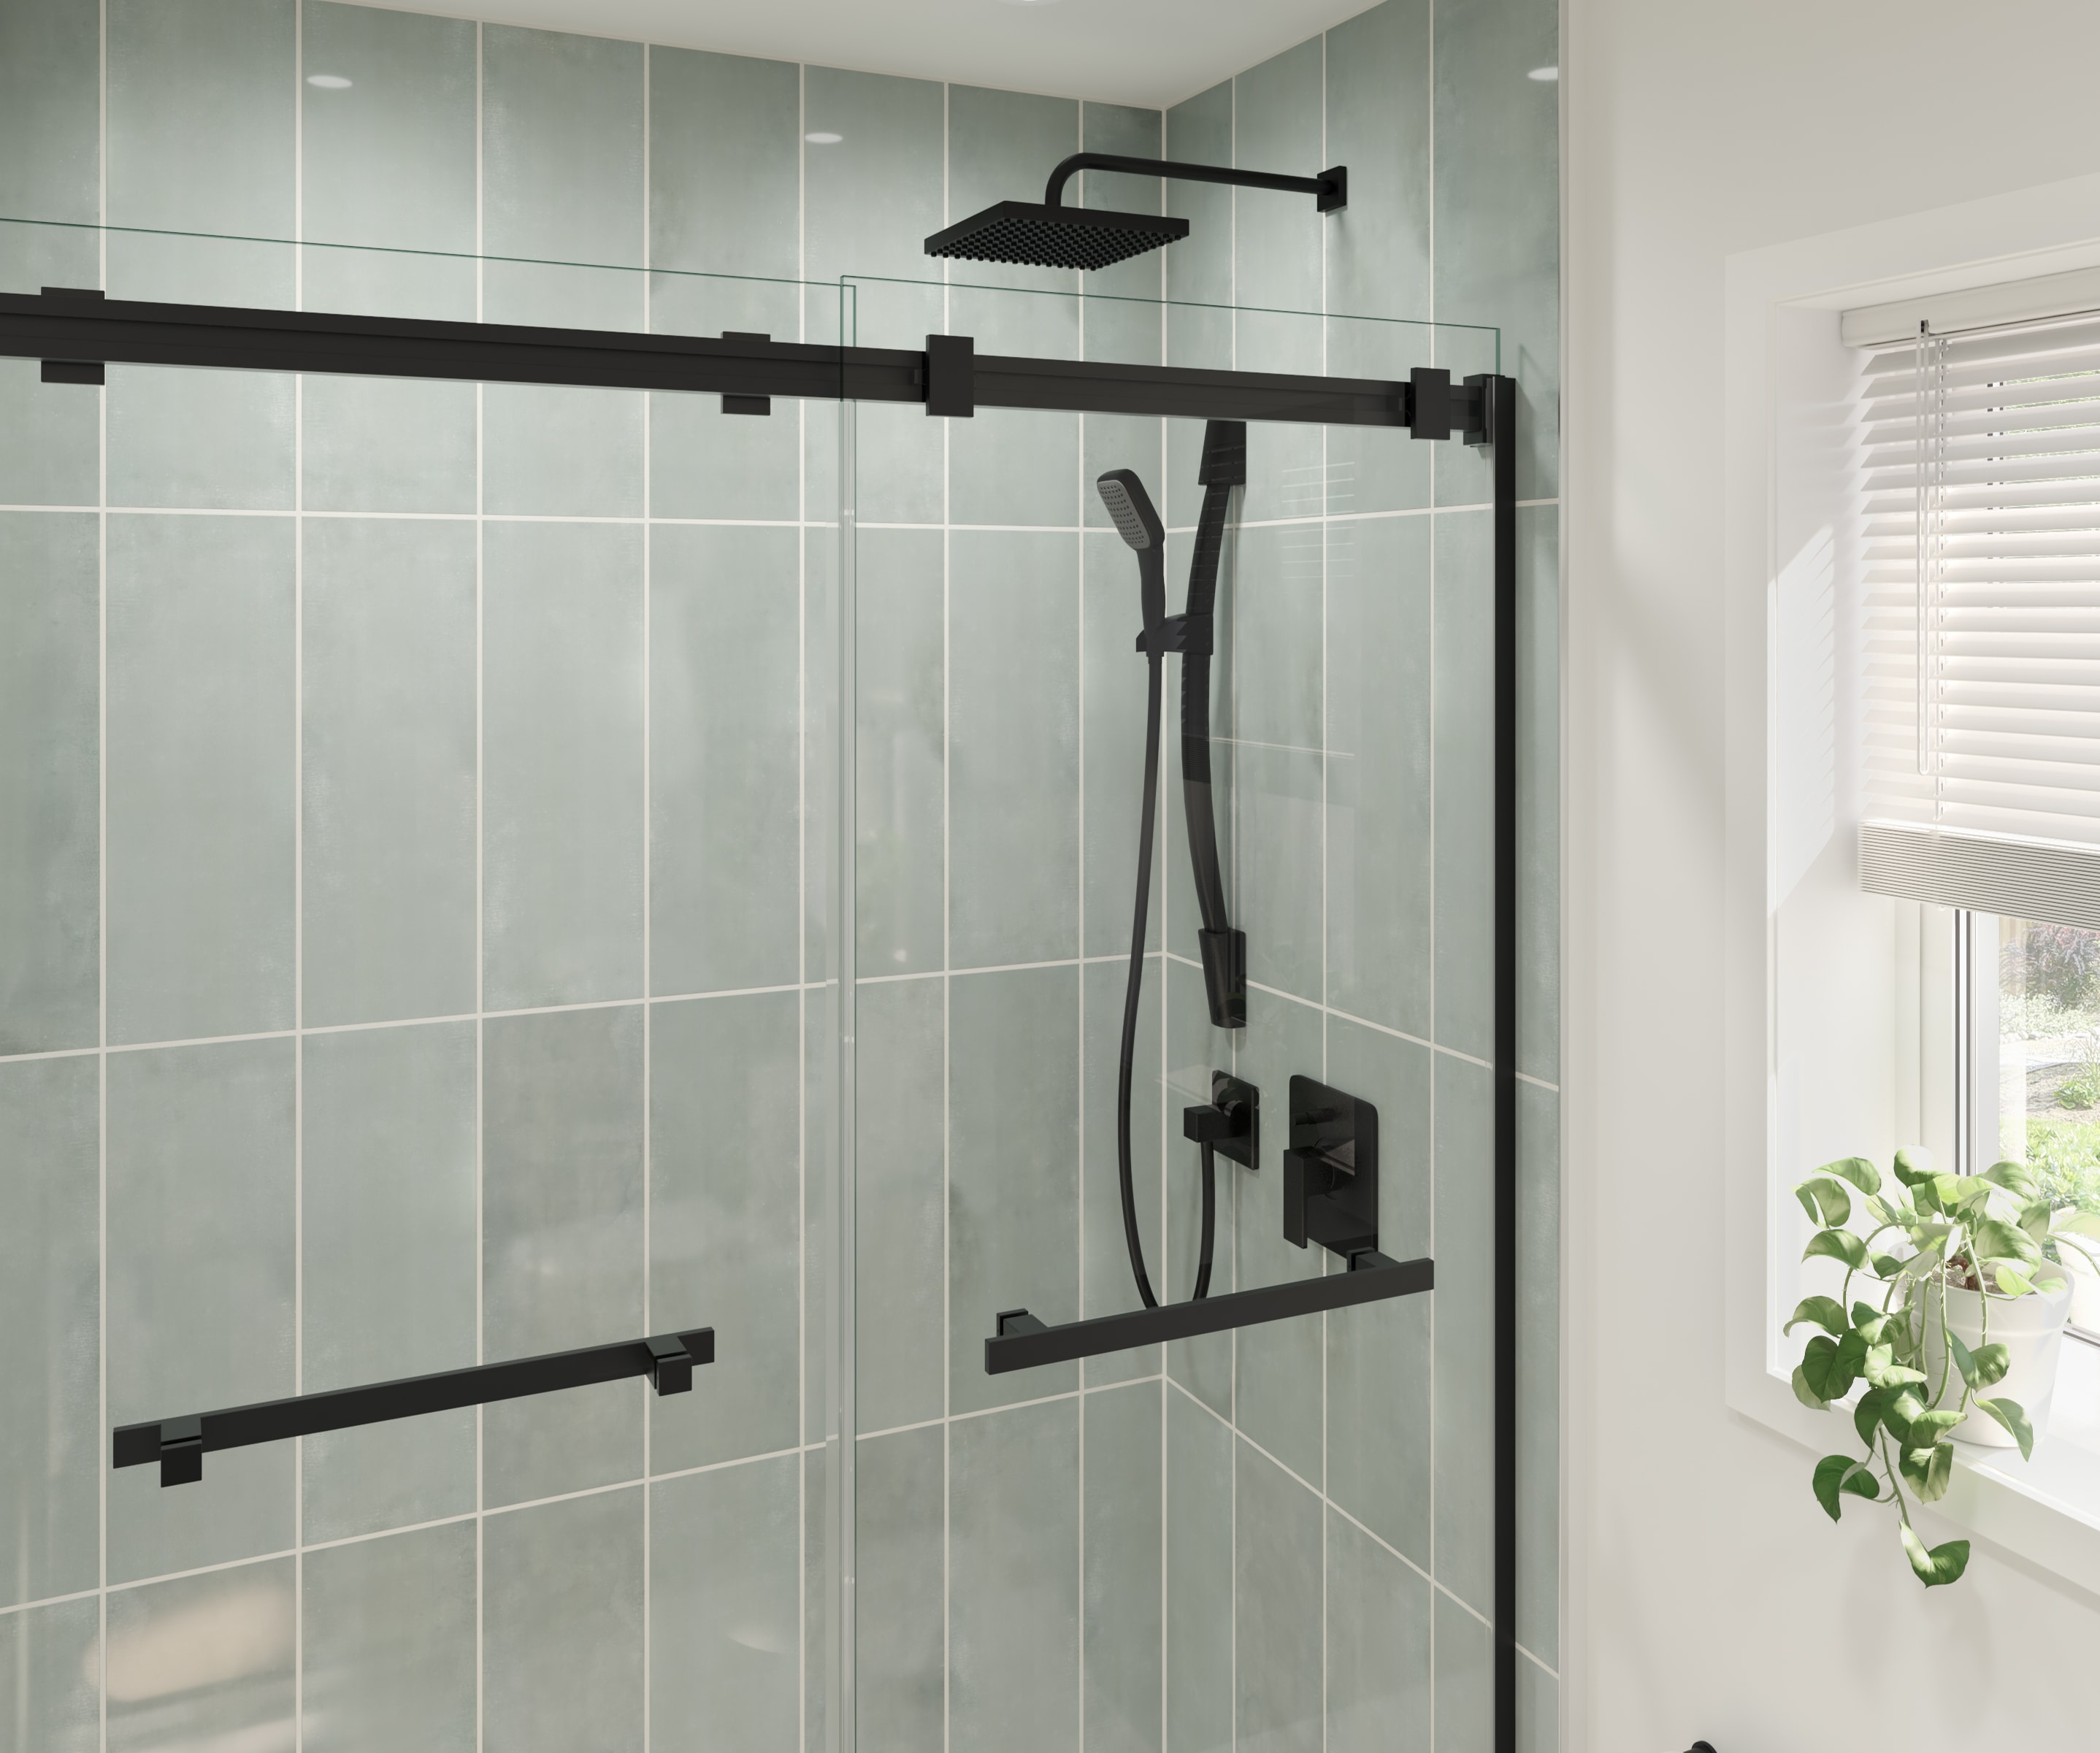 Shower with wall tiles and matte black plumbing